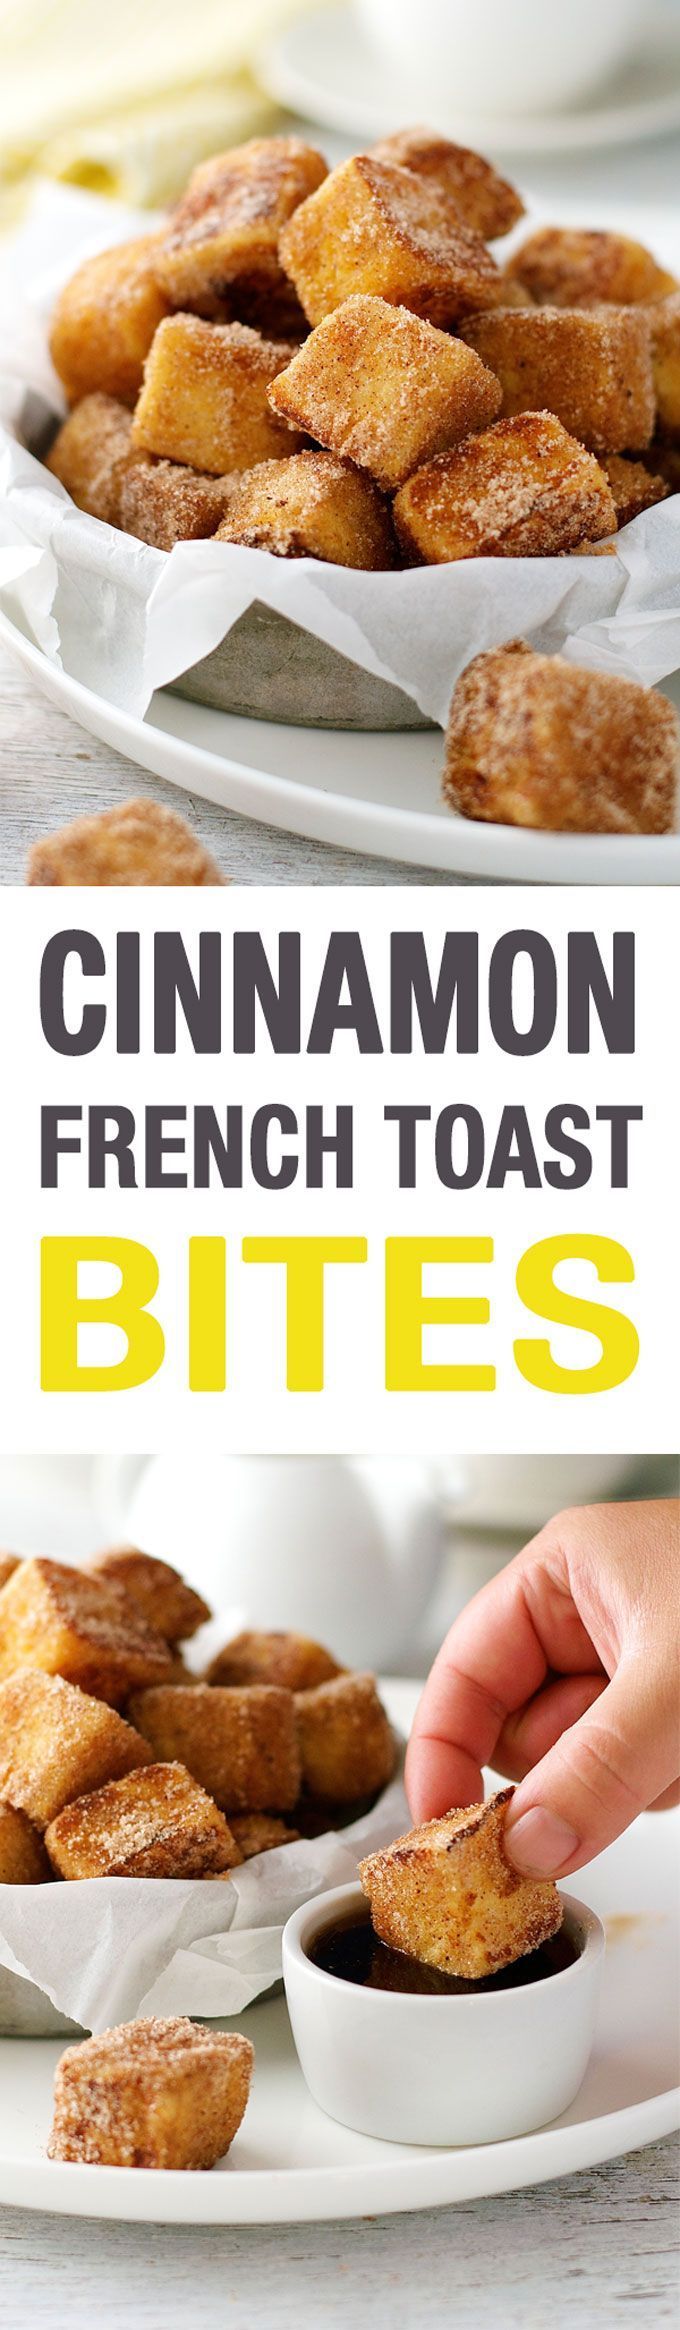 French Toast Bites – fun to make, you kind of “sauté” them! And fun to eat – they taste like cinnamon doughnuts!